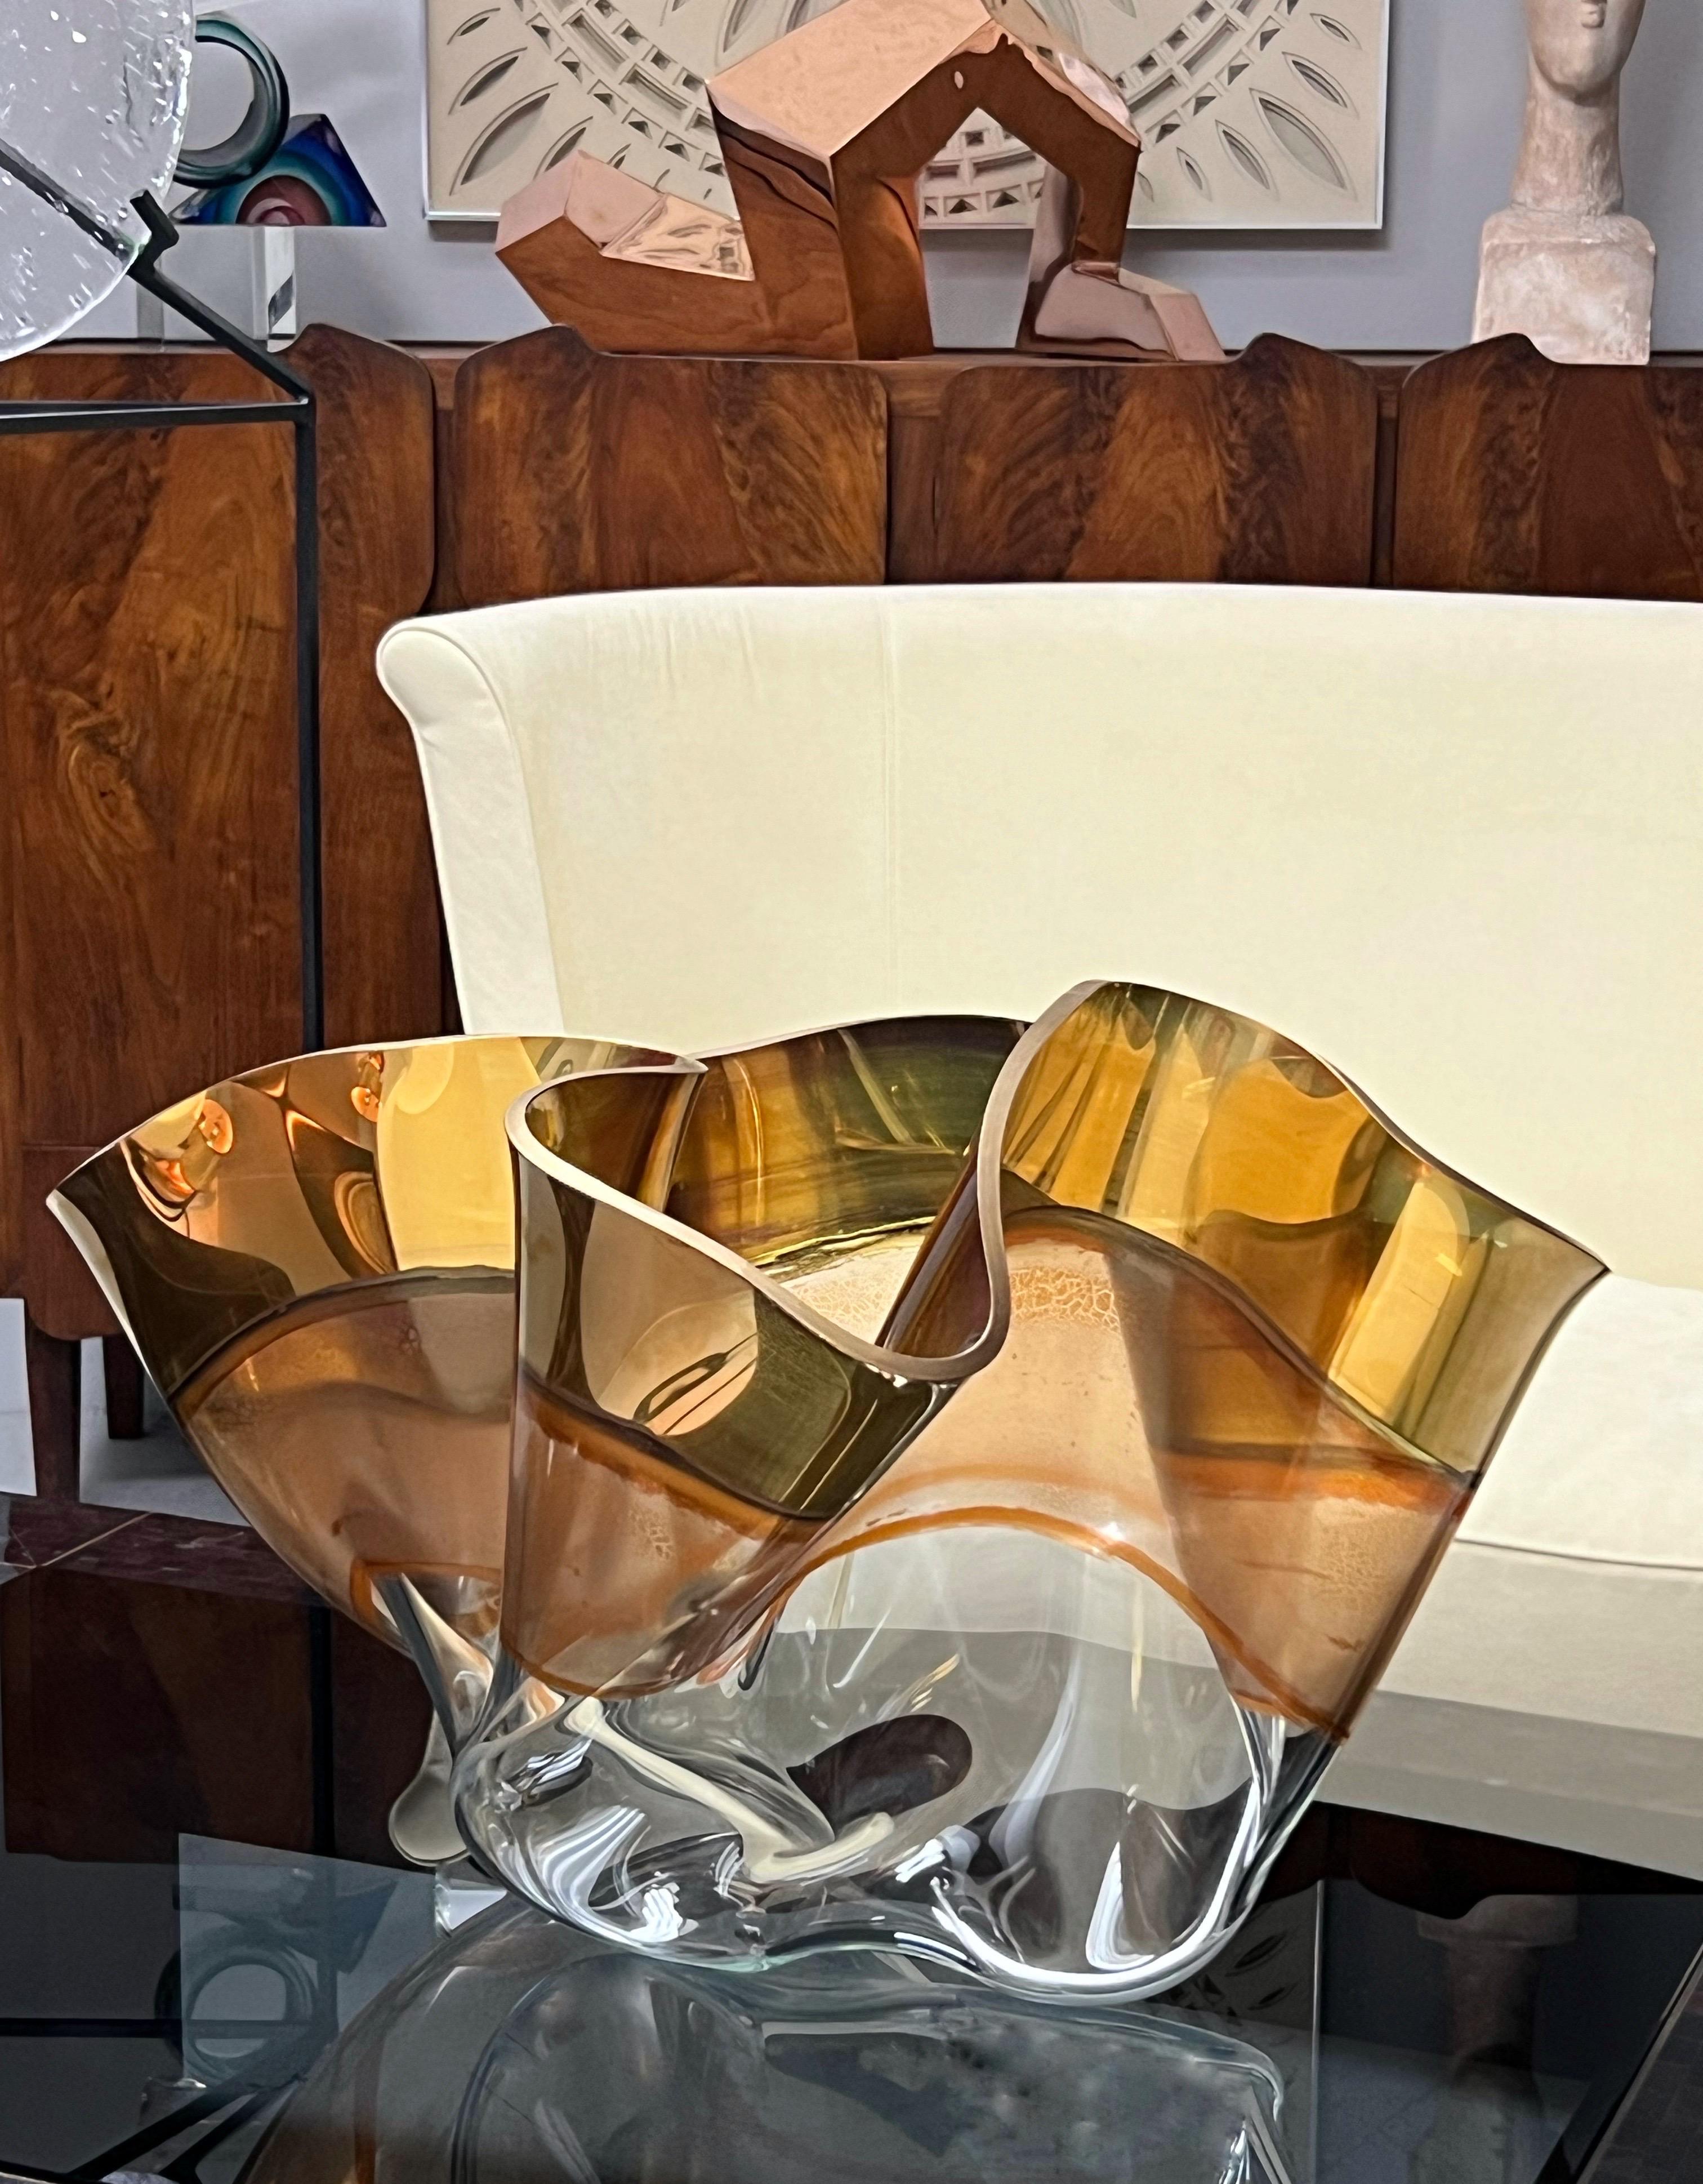 A very large sculptural piece of art glass by Laurel Fyfe (1956-2011)
A “Marina” vessel, slumped glass with color and metallic luster application. In this case gold metallic with copper undertones. Could be presented on its side as well